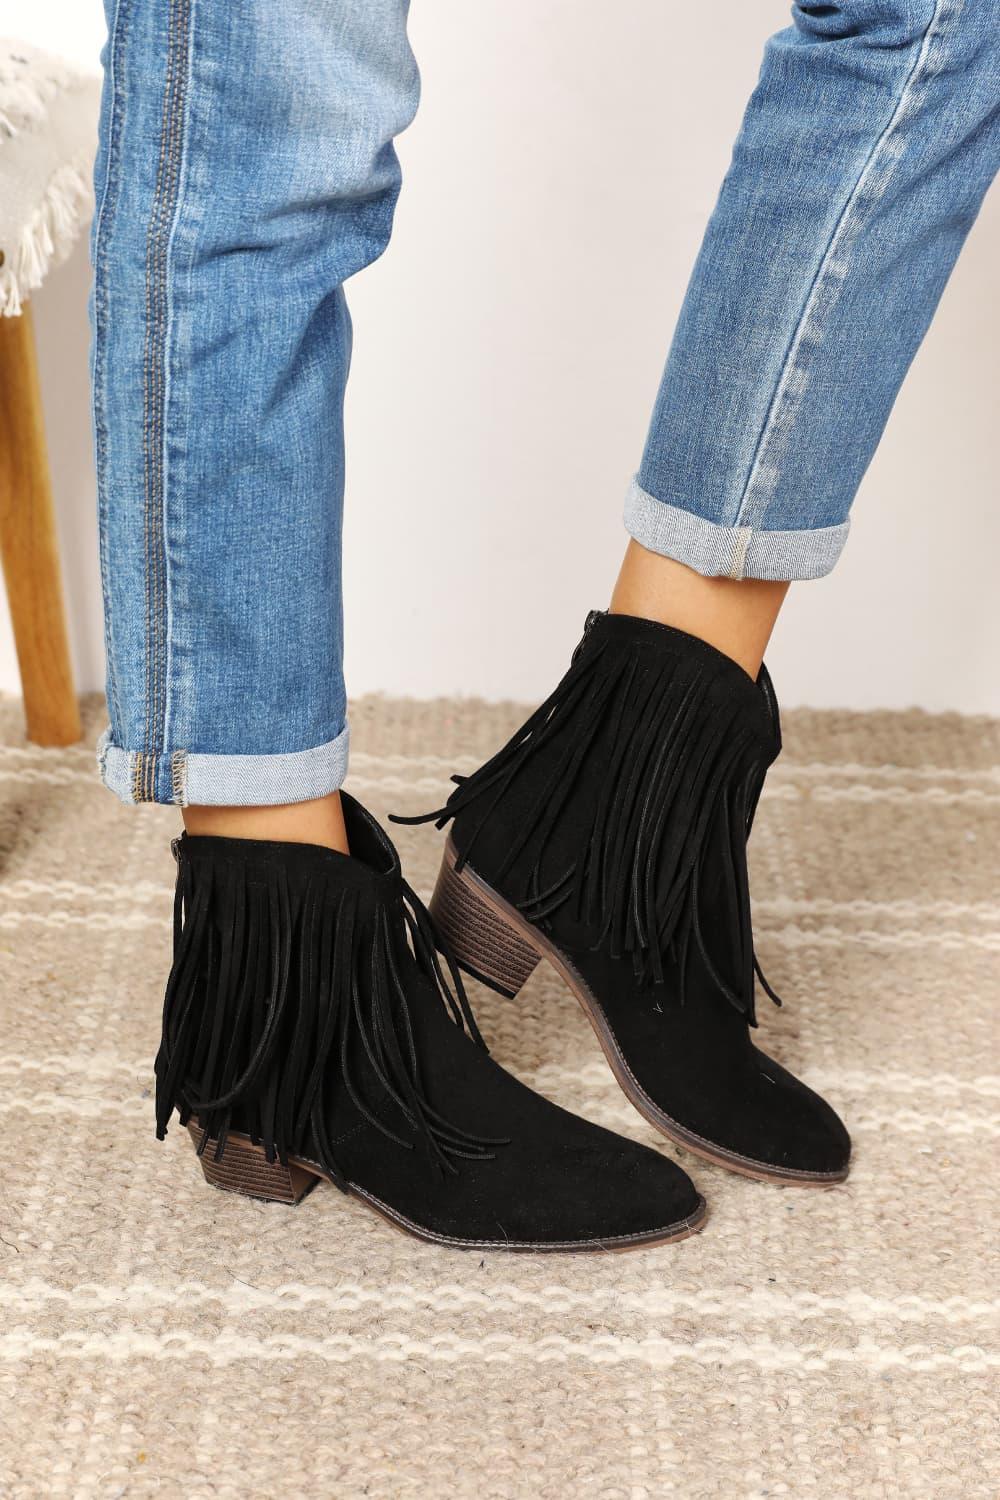 Black Fringy Cowgirl Western Ankle Boots - Klazzi Fashion Boutique